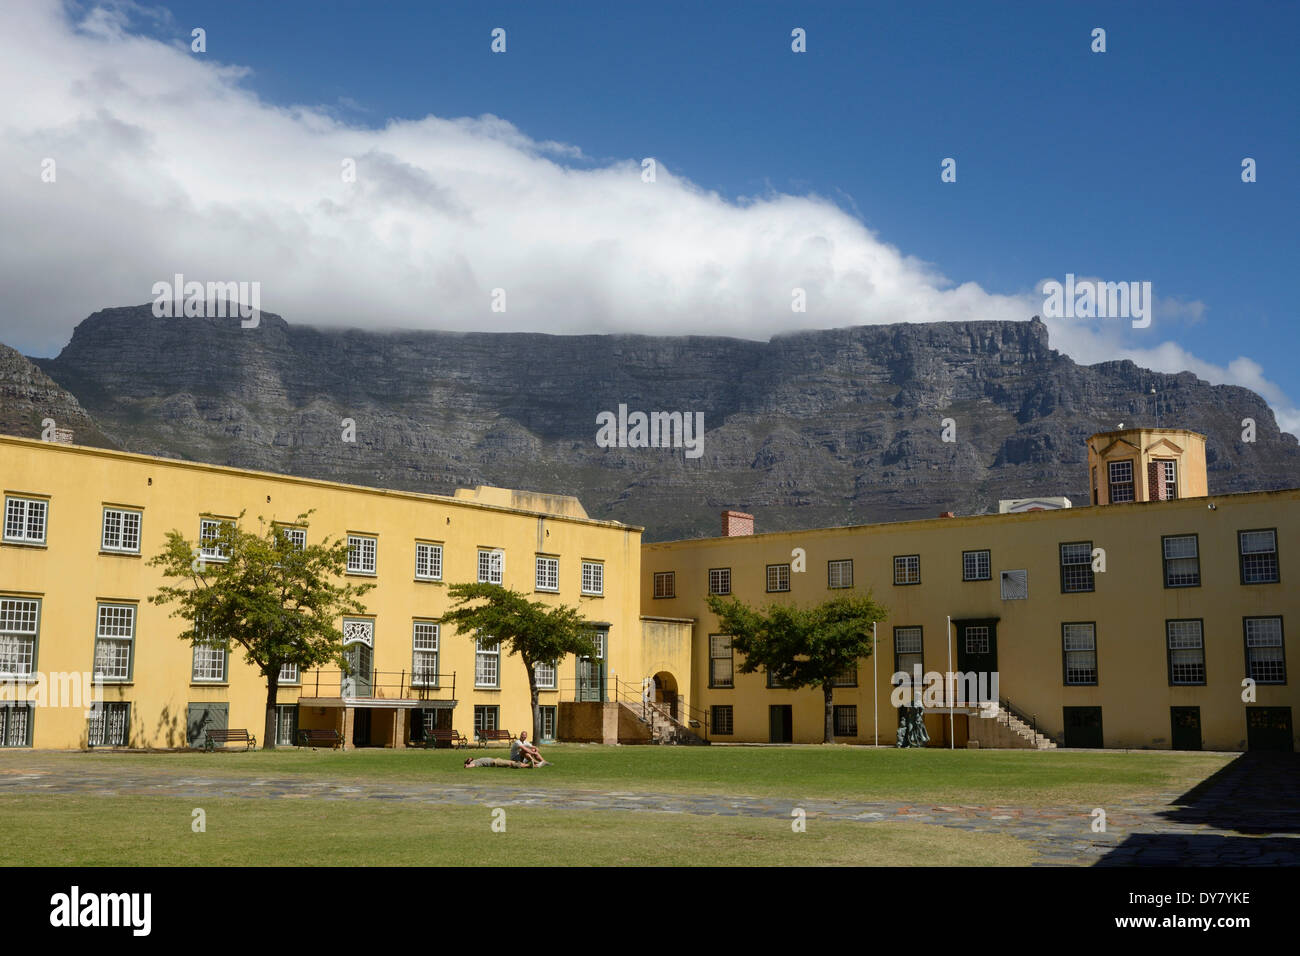 Castle of Good Hope, the Table Mountain at the back, Cape Town, Western Cape, South Africa Stock Photo